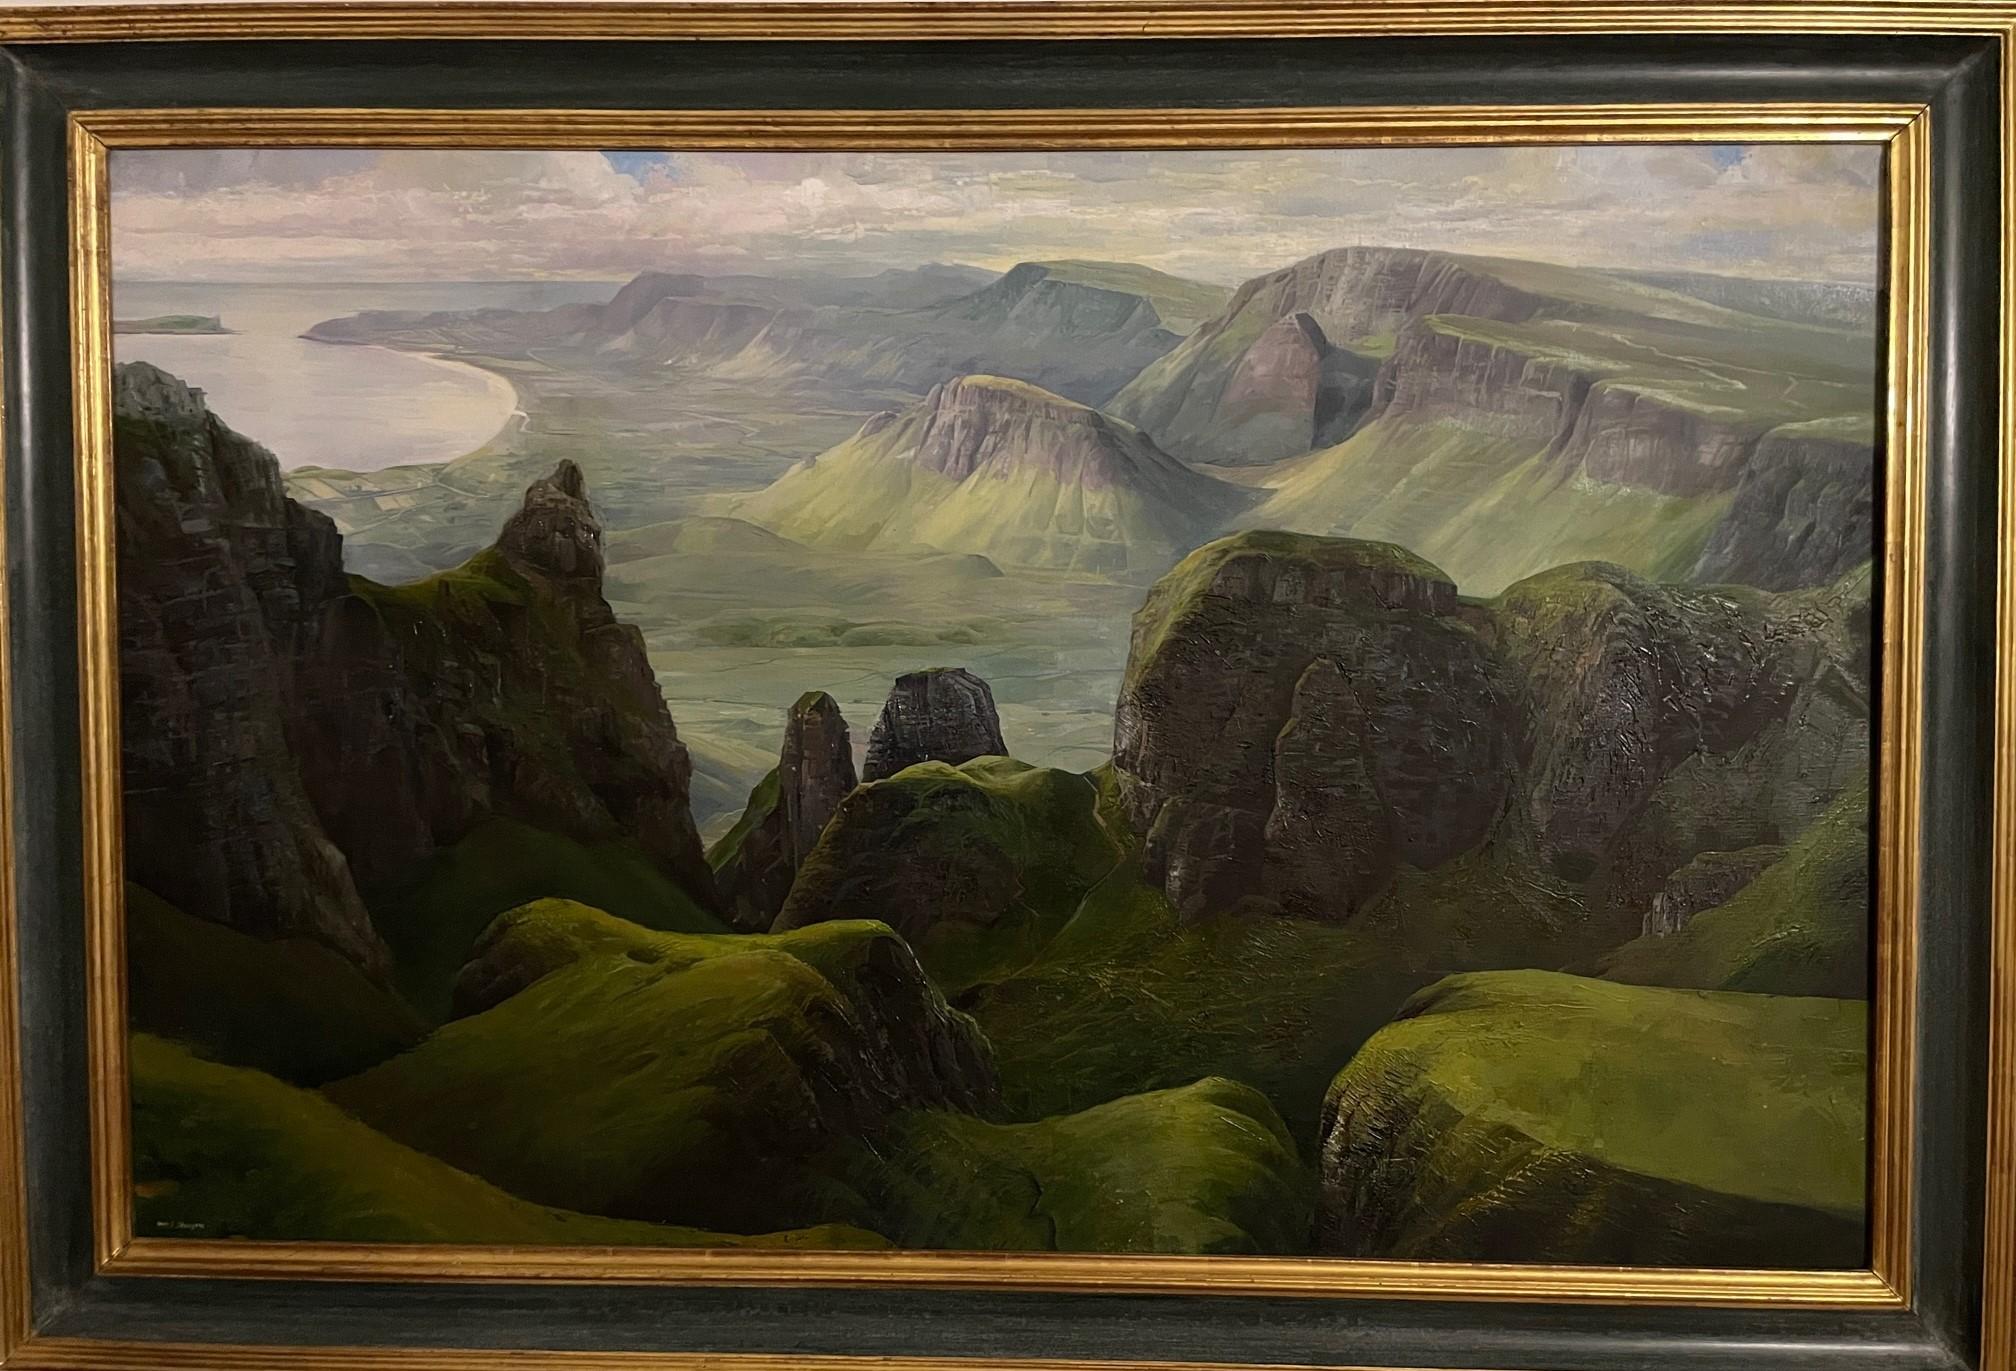 The Quiraing, Isle of Skye - Painting by Alan Thompson